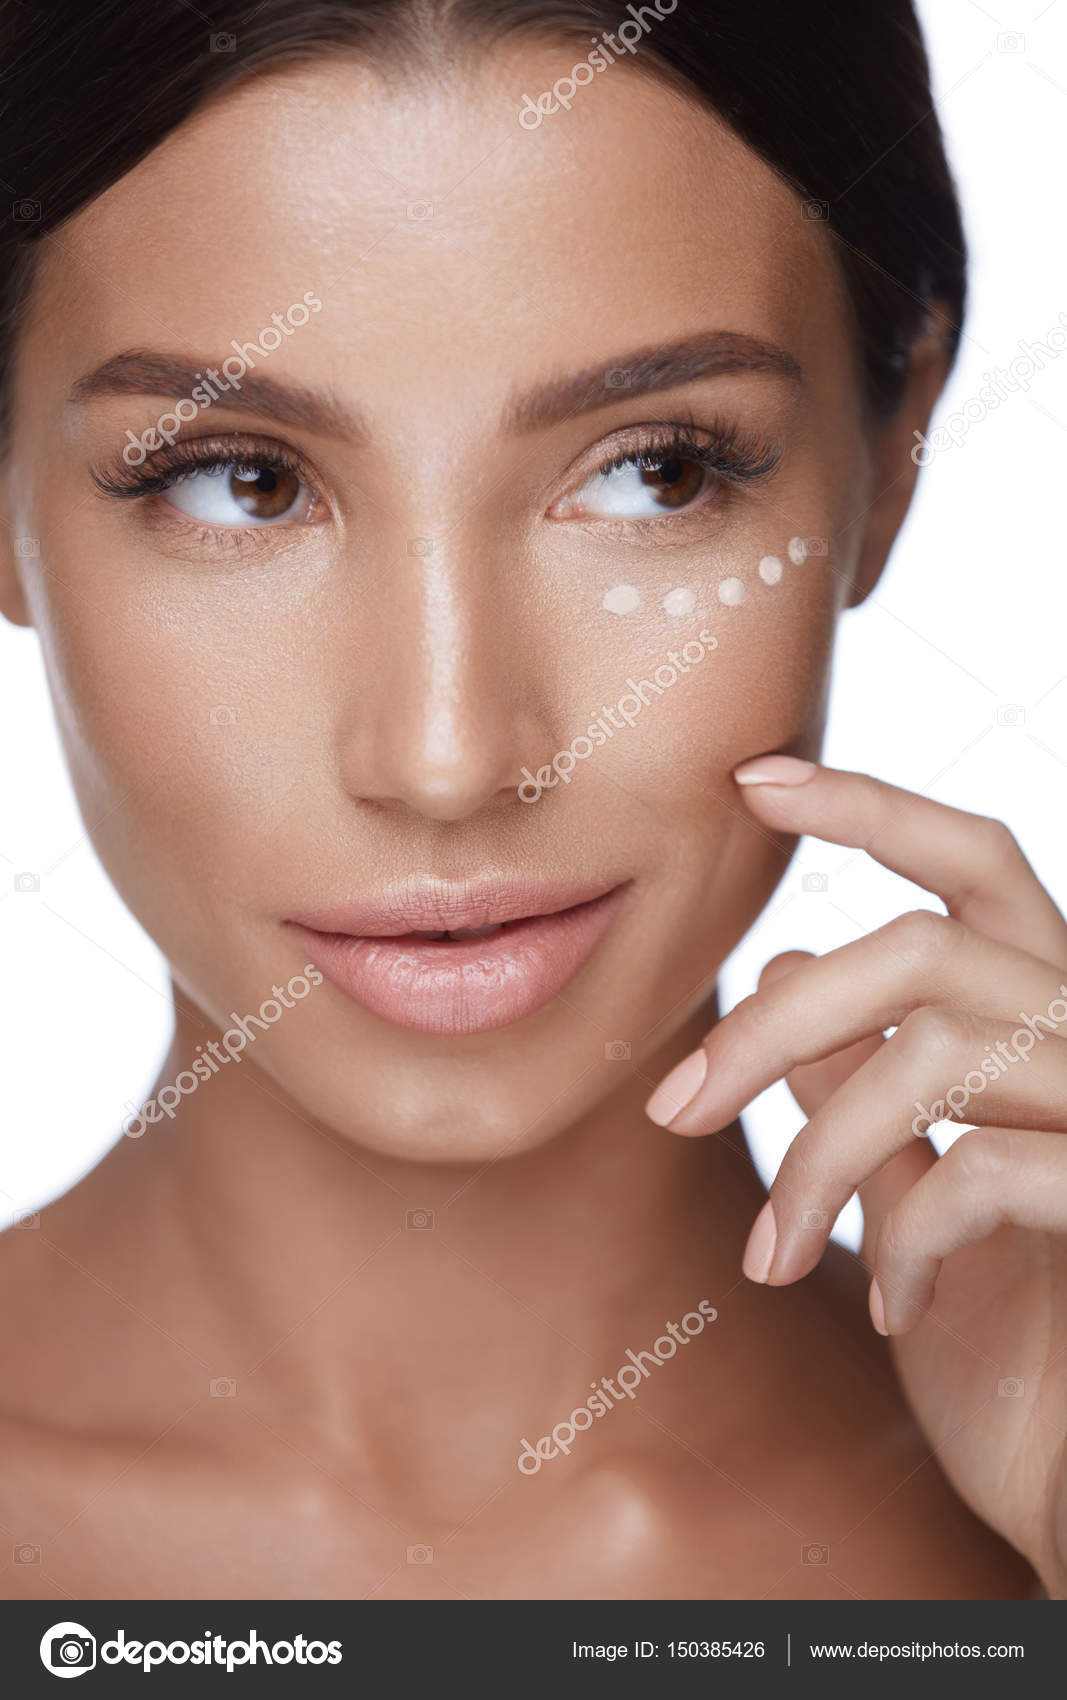 White Makeup Under Eyes Woman Beauty Face With Concealer Under Eyes And Beautiful Makeup